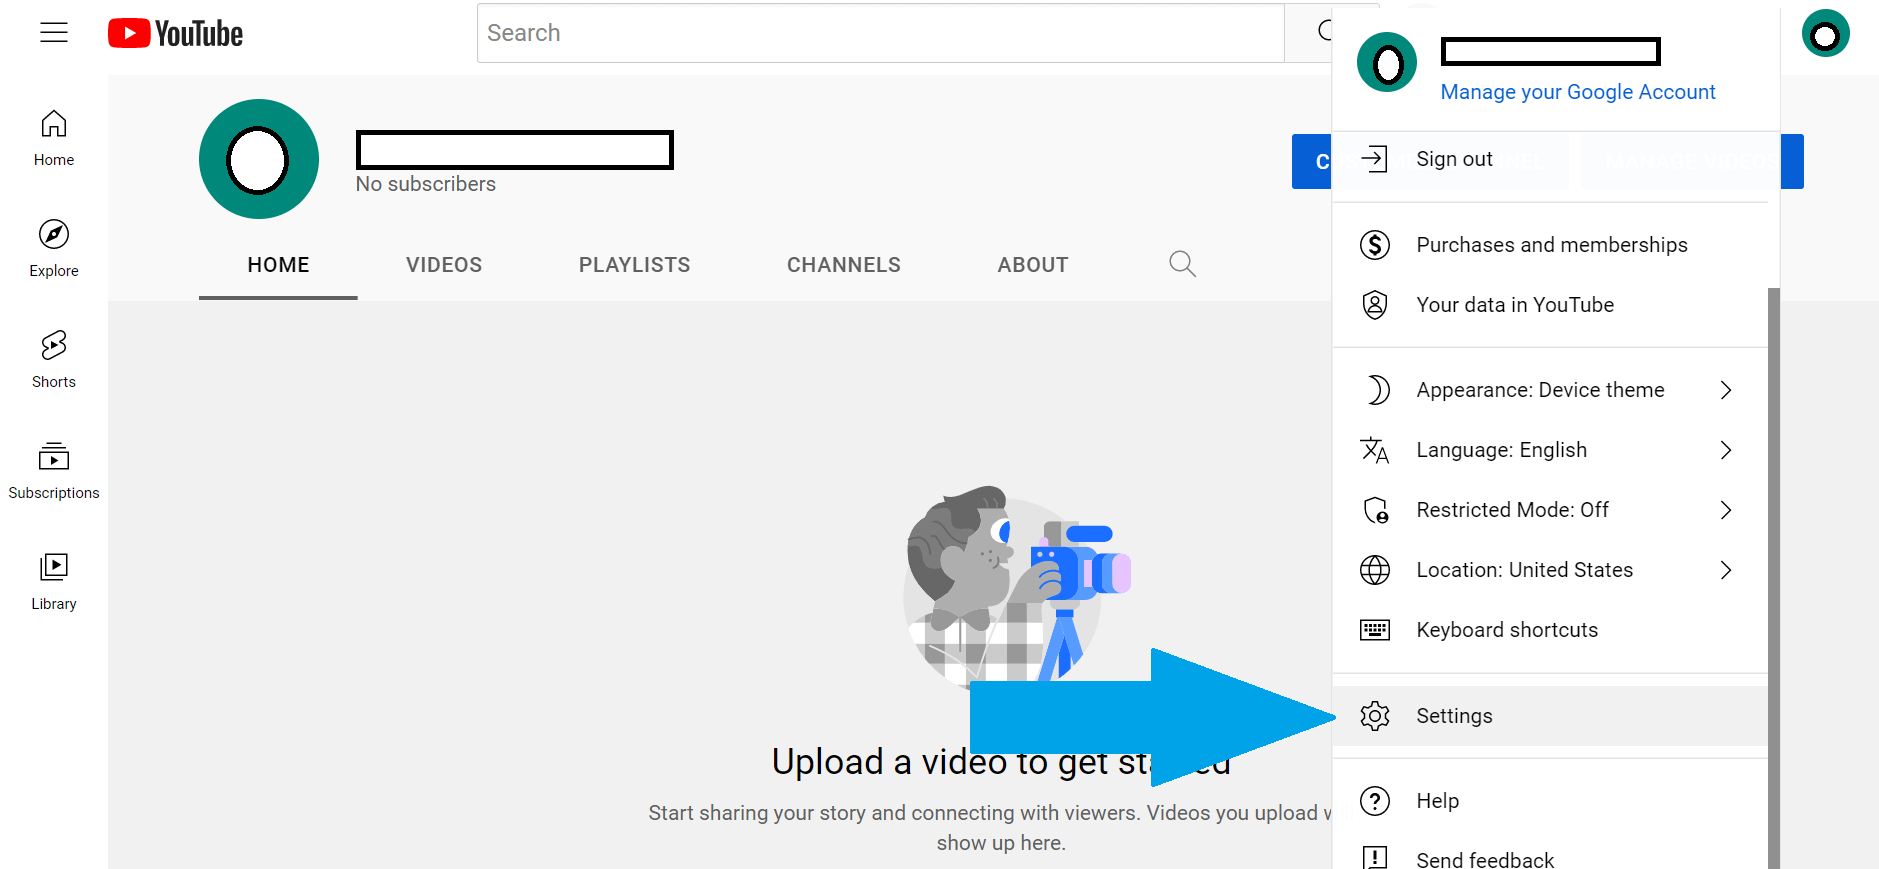 YouTube channel default homepage with an arrow pointing to "Settings" in the dropdown menu